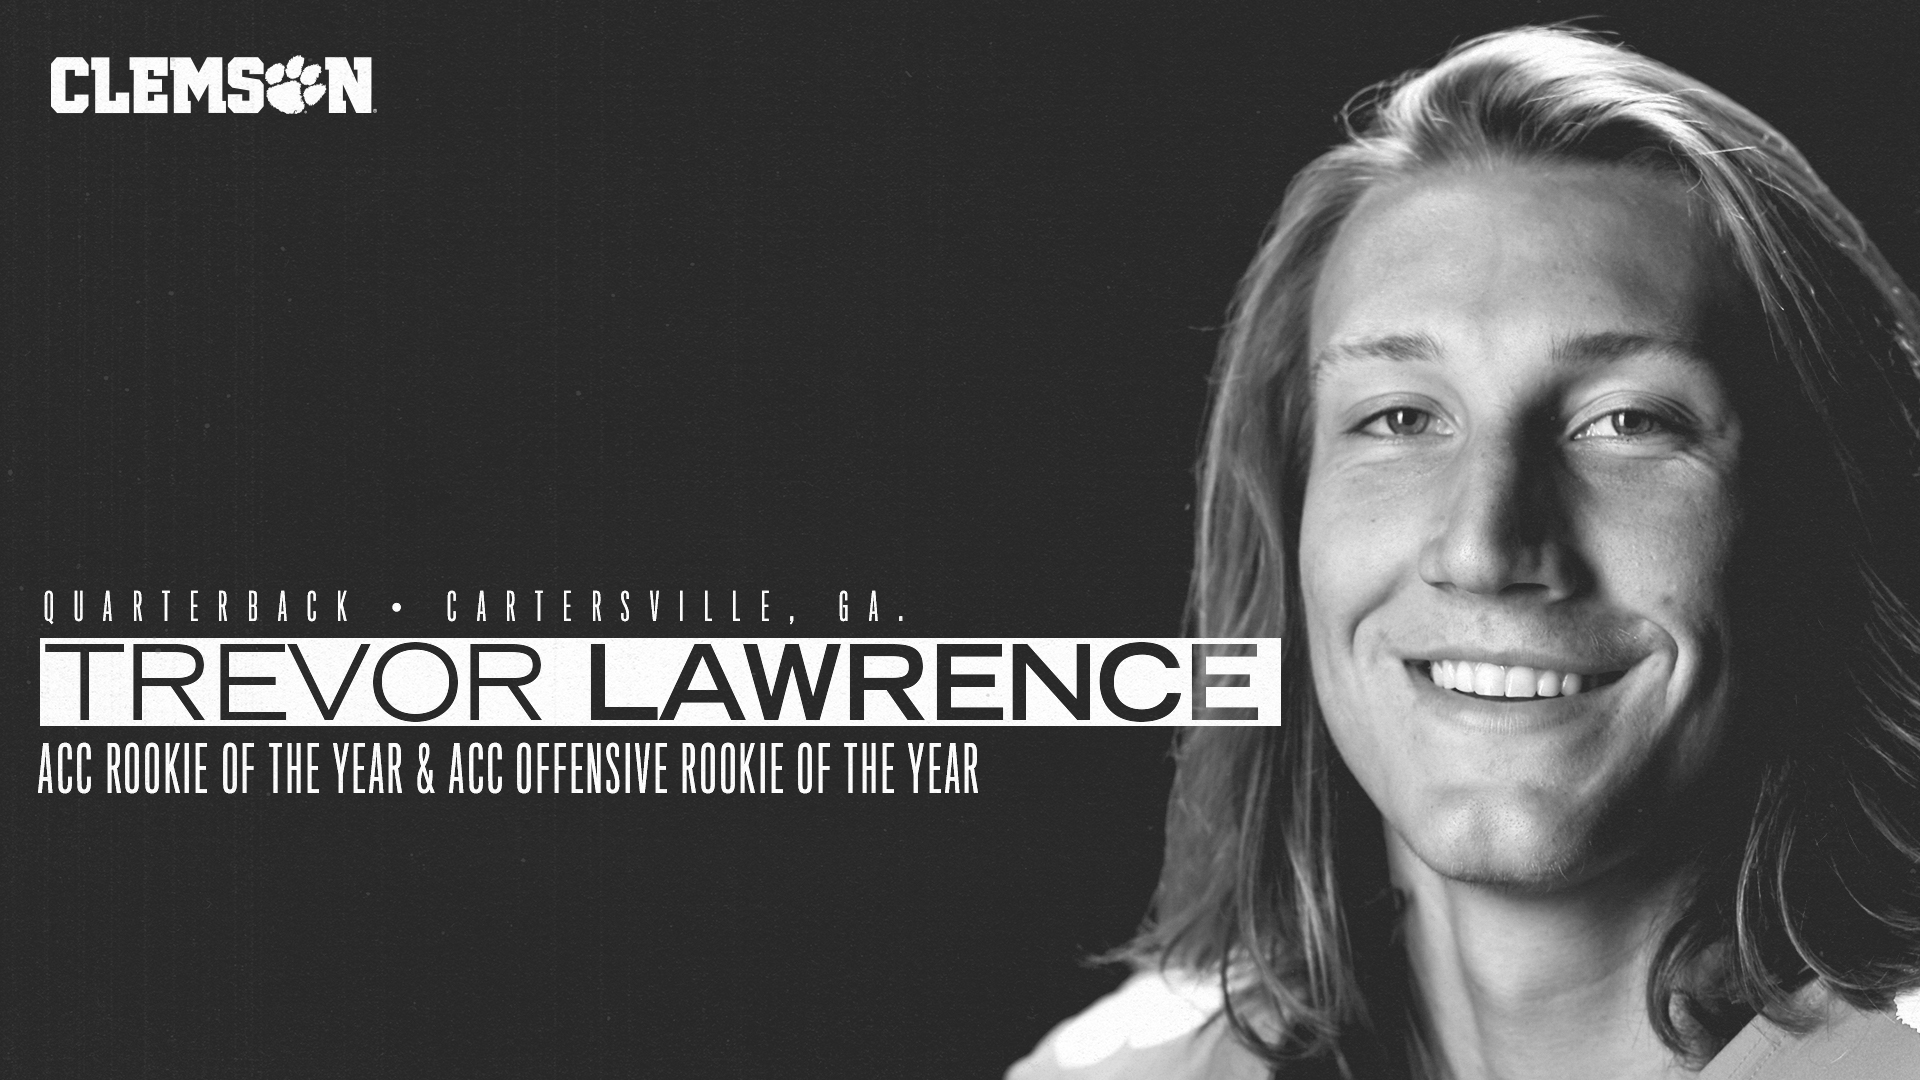 Trevor Lawrence Named ACC Rookie of the Year